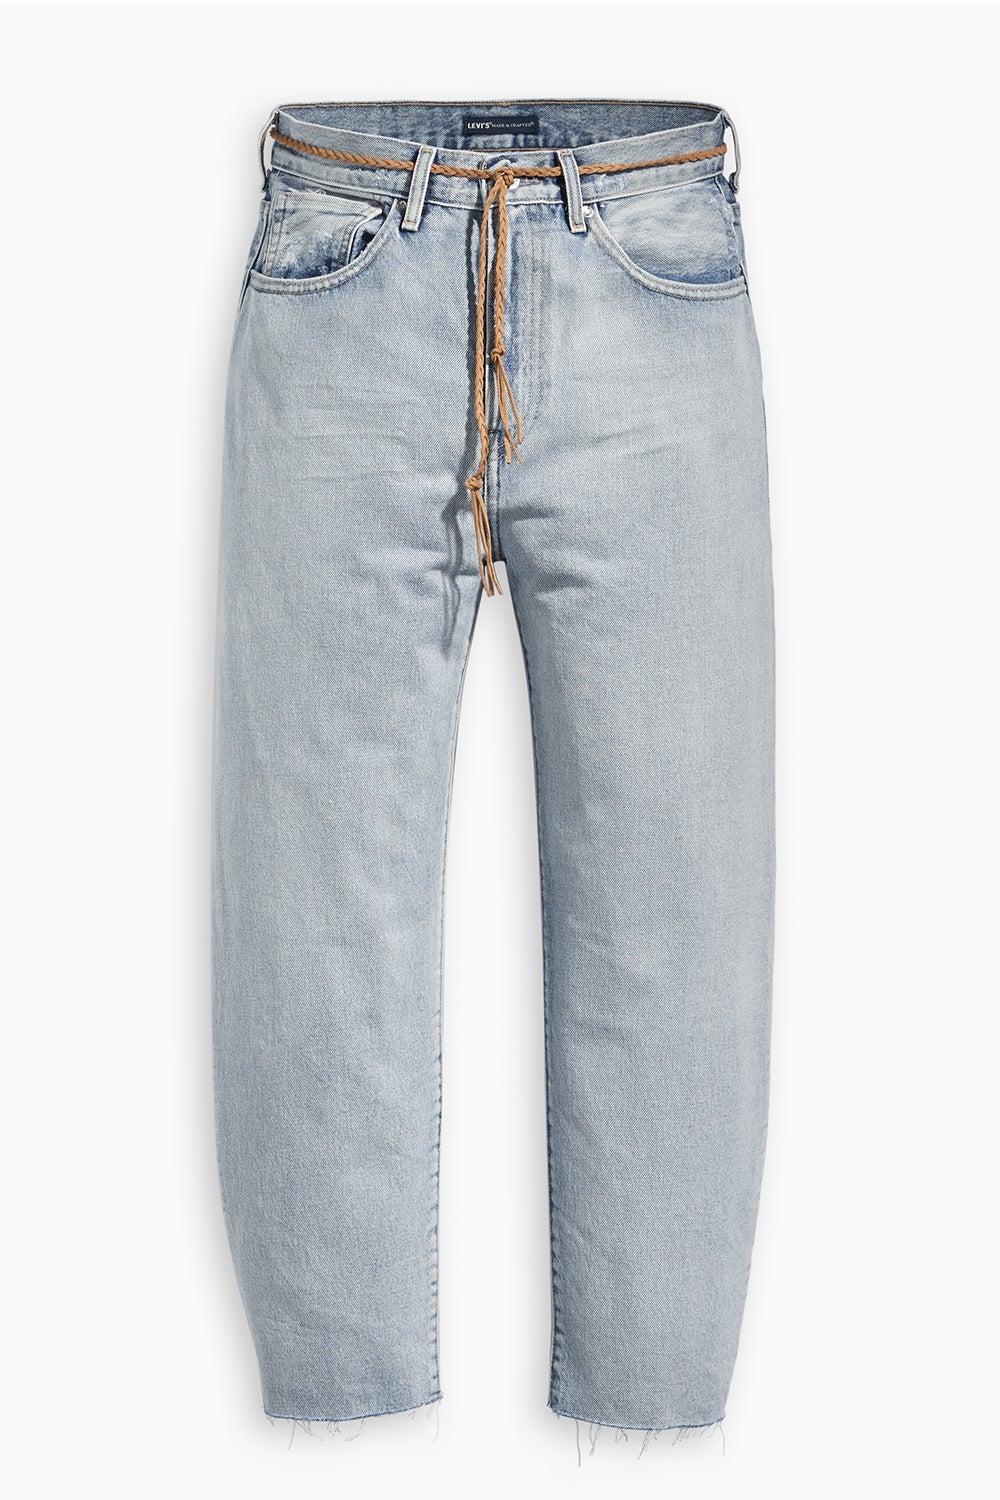 Levi's Made and Crafted Barrel Jeans Crisp Sky